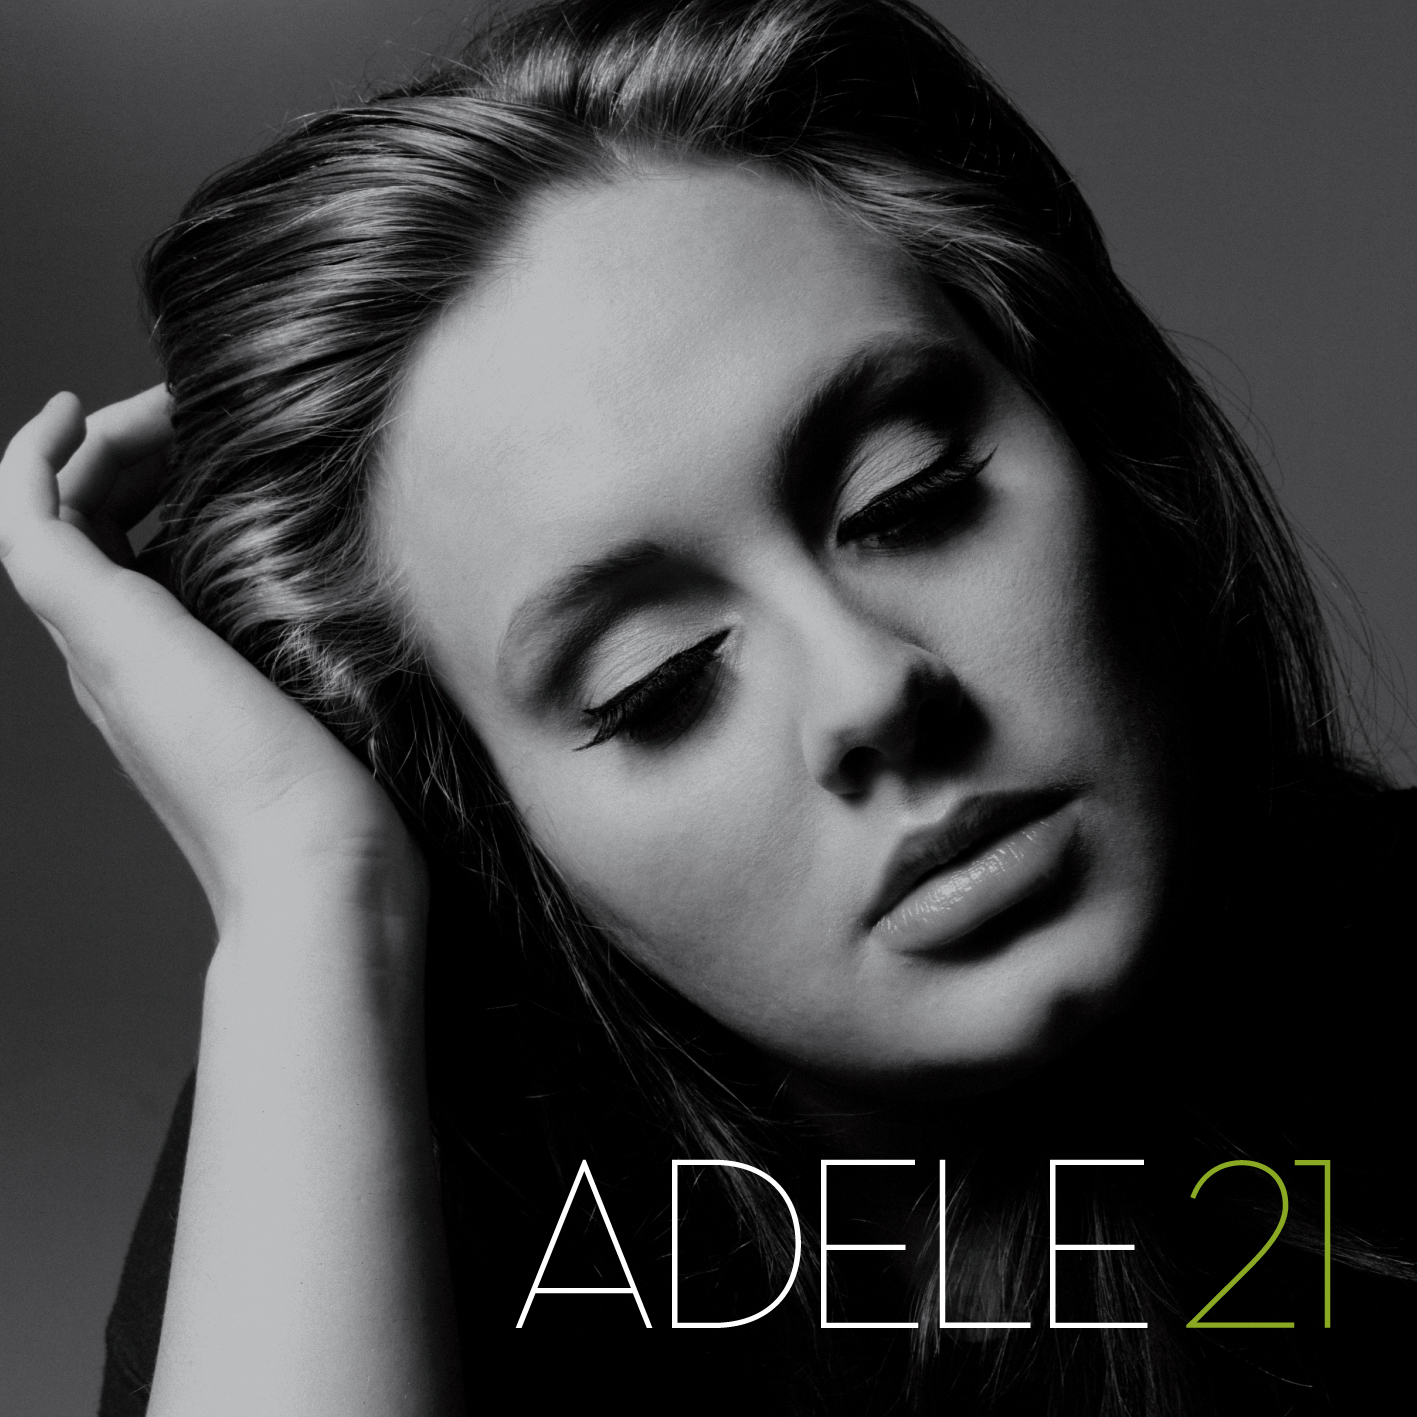 Adele+rolling+stone+poster